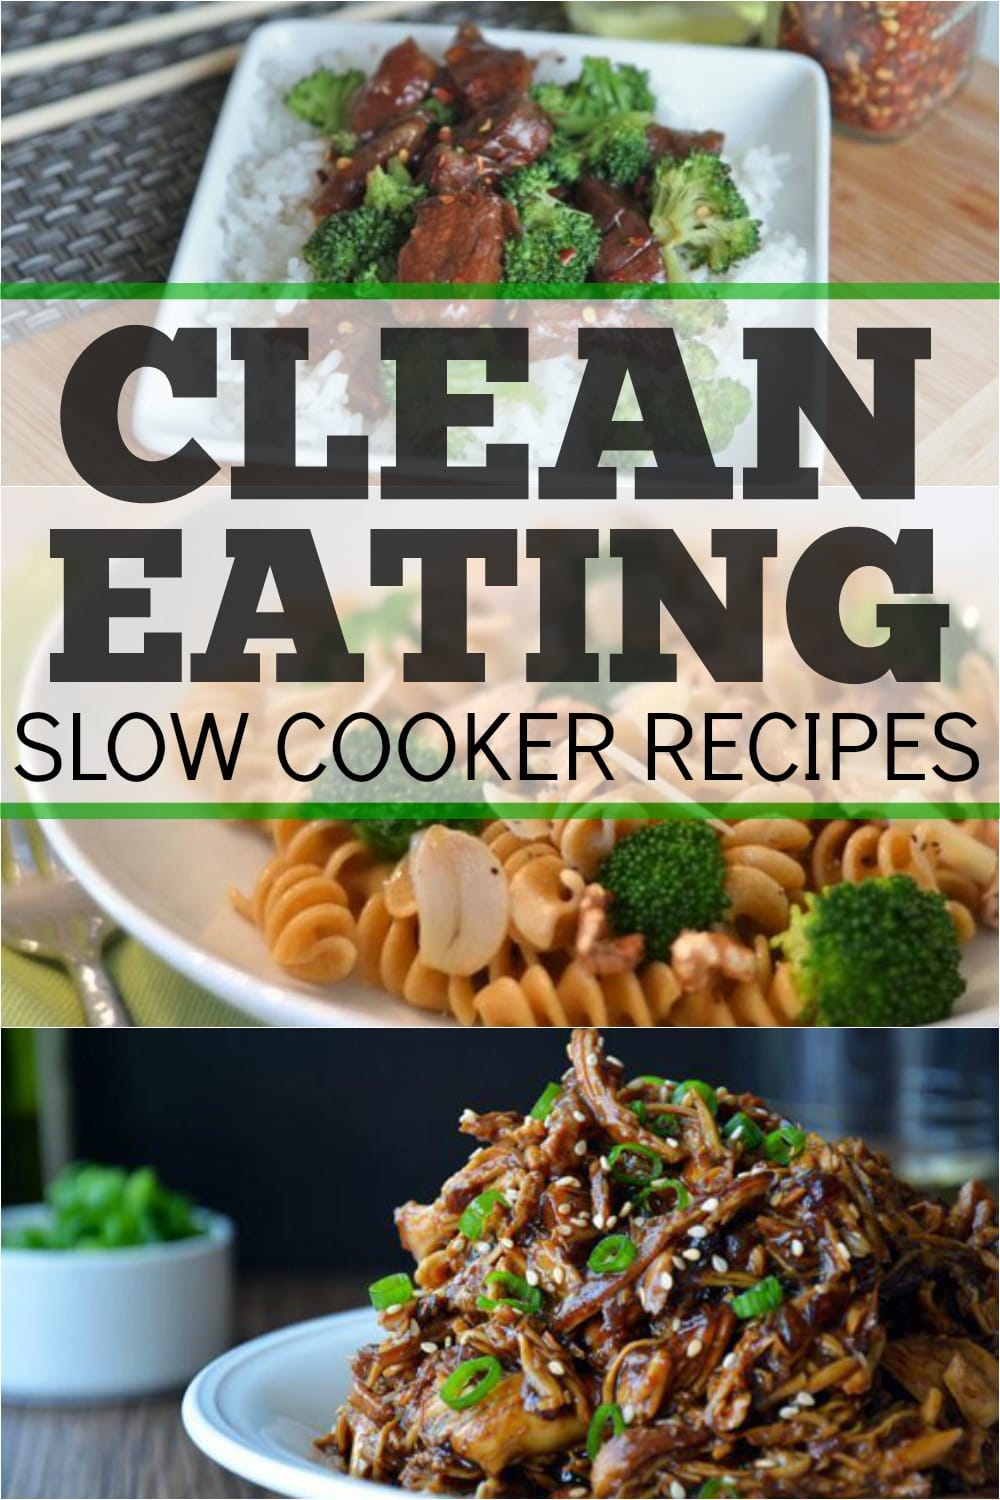 50+ Healthy Crockpot Recipes - The Clean Eating Couple